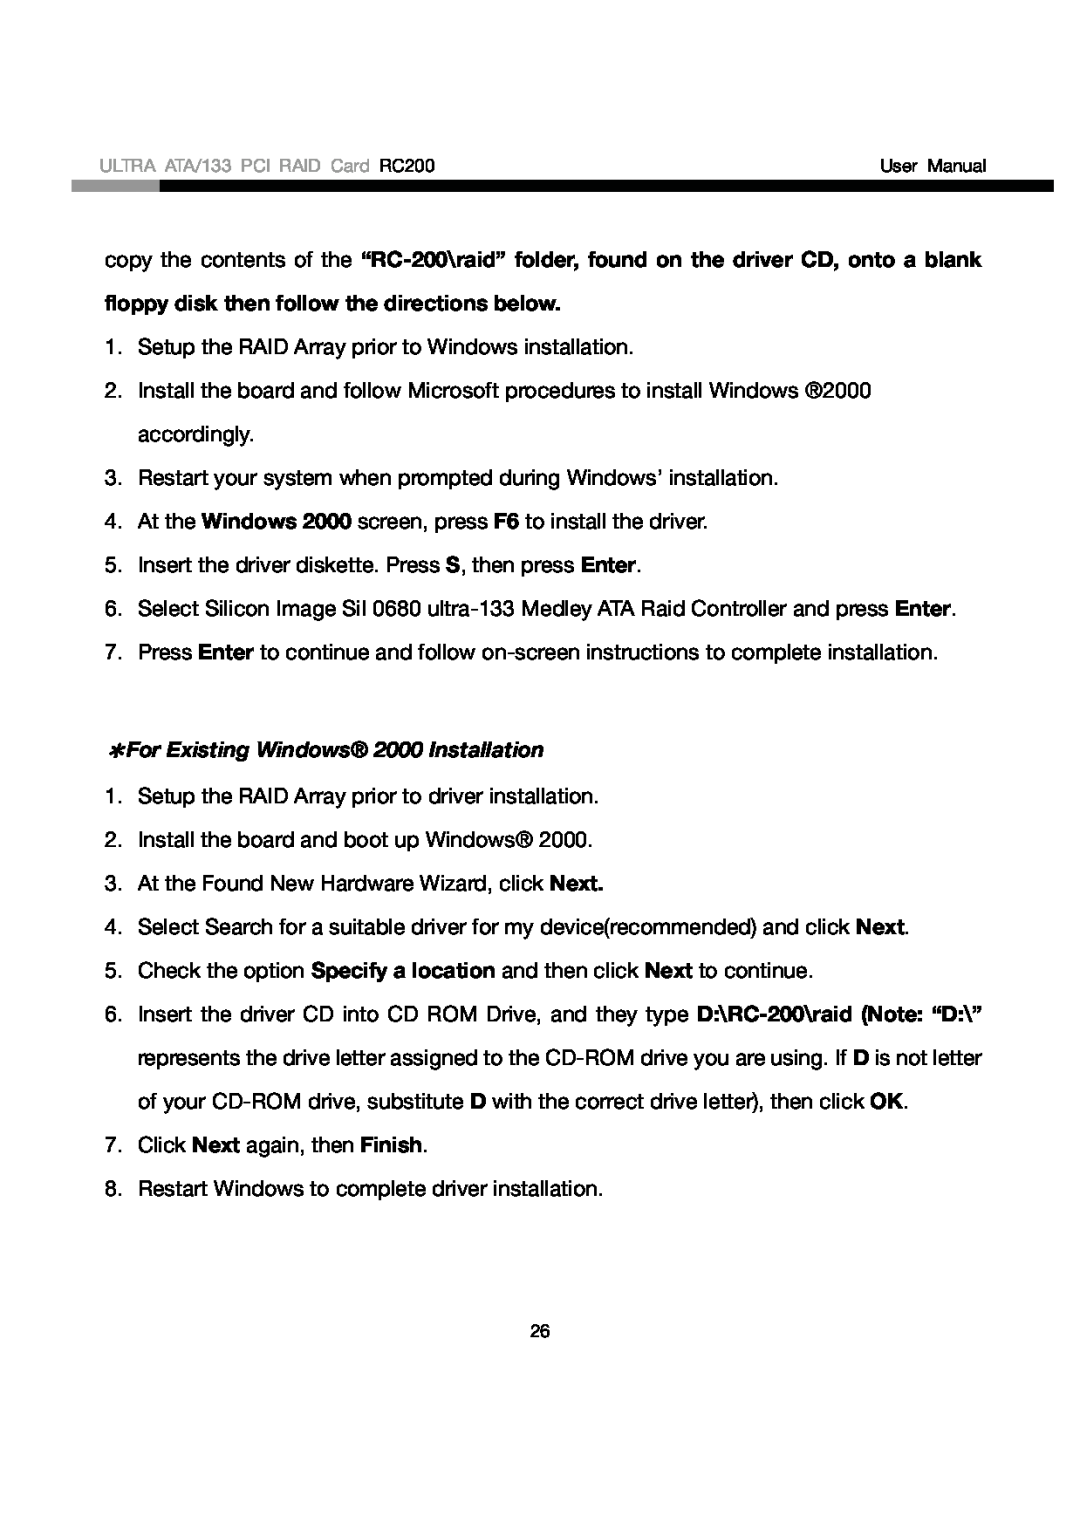 Rosewill RC200 user manual floppy disk then follow the directions below, ＊For Existing Windows 2000 Installation 